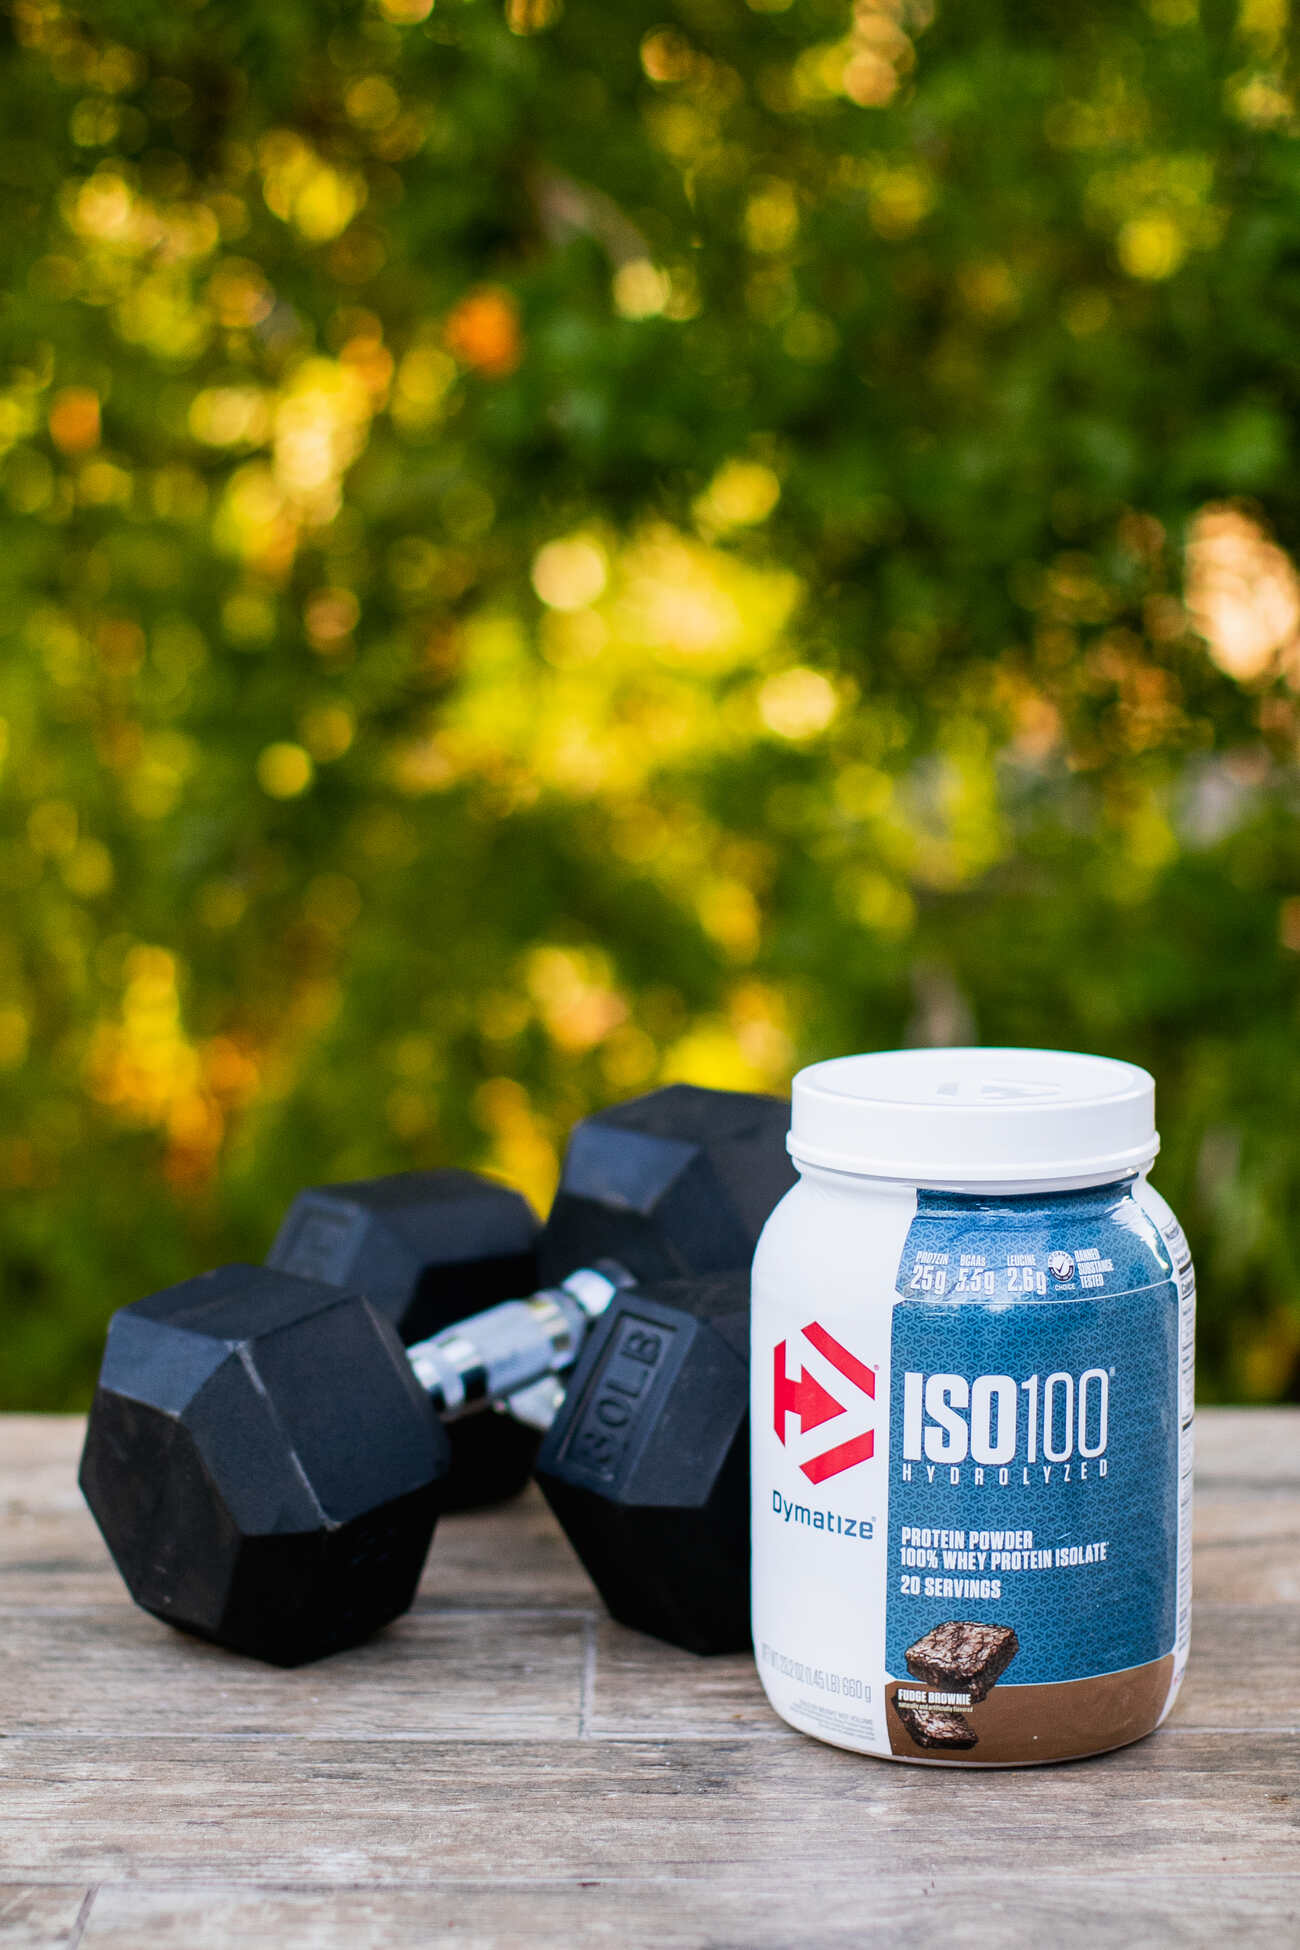 Fitness equipment and a protein powder jar on a wooden table outdoors, with green foliage in the background